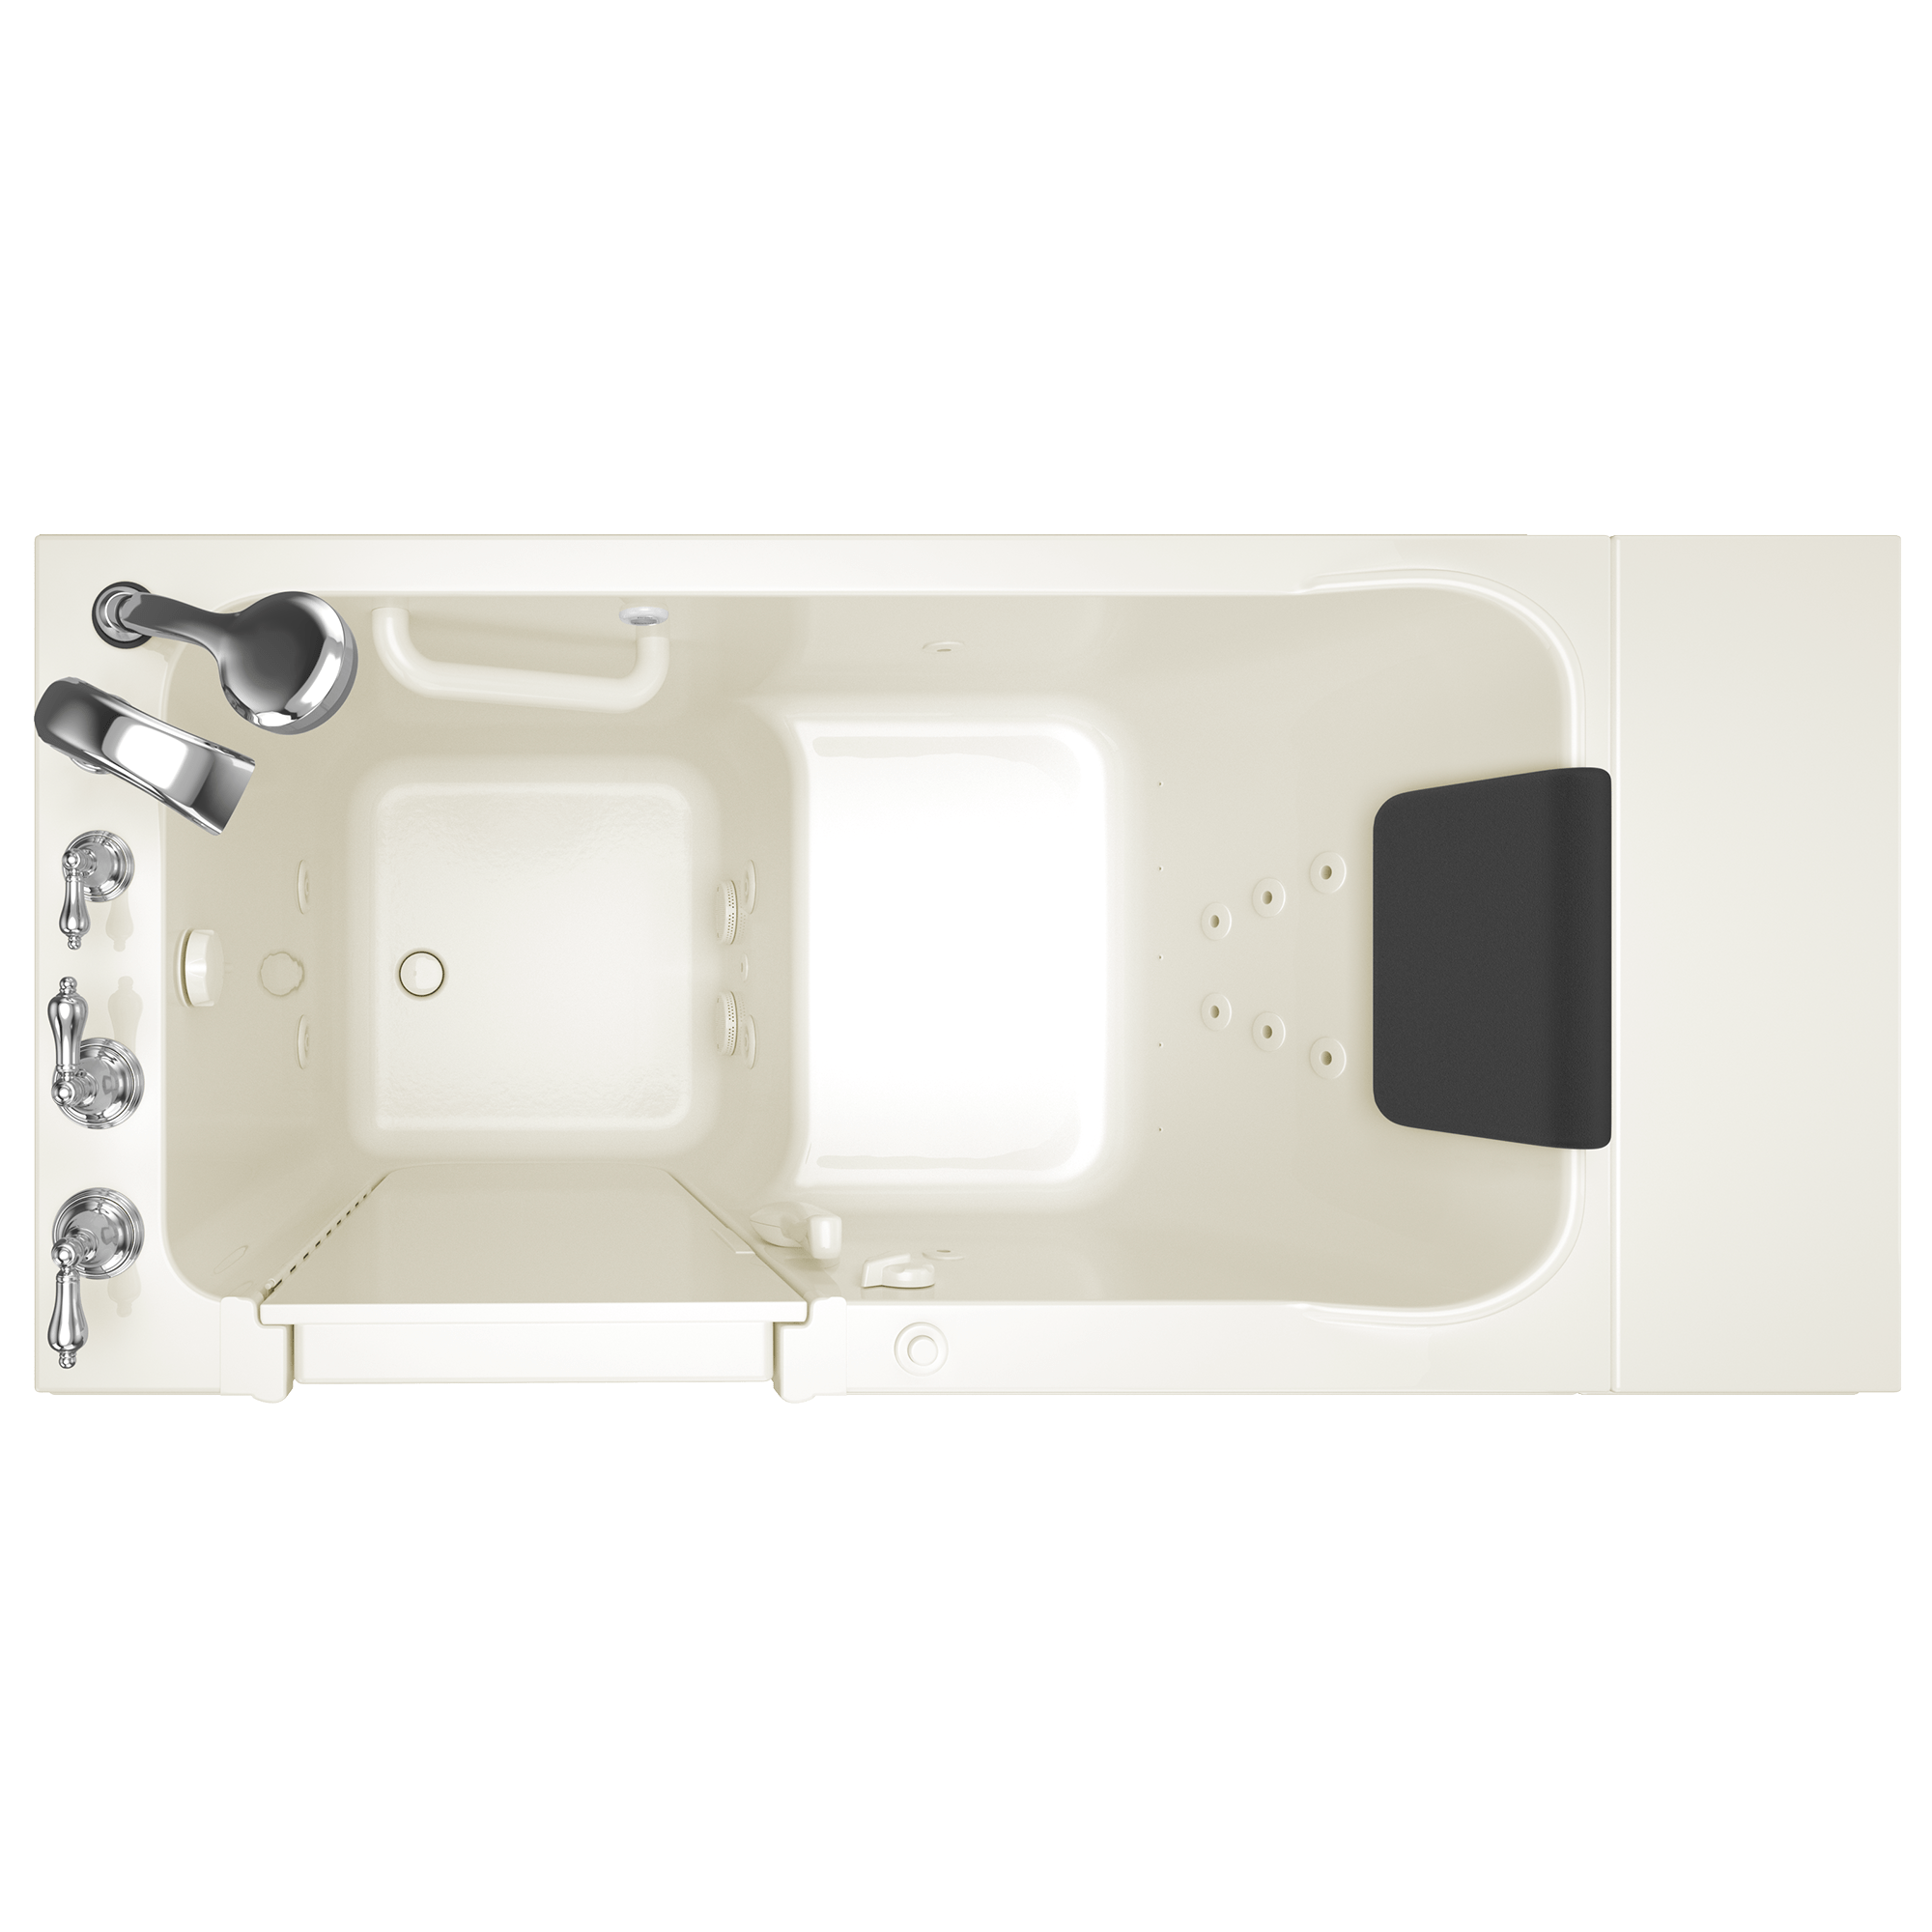 Acrylic Luxury Series 28 x 48-Inch Walk-in Tub With Whirlpool System - Left-Hand Drain With Faucet